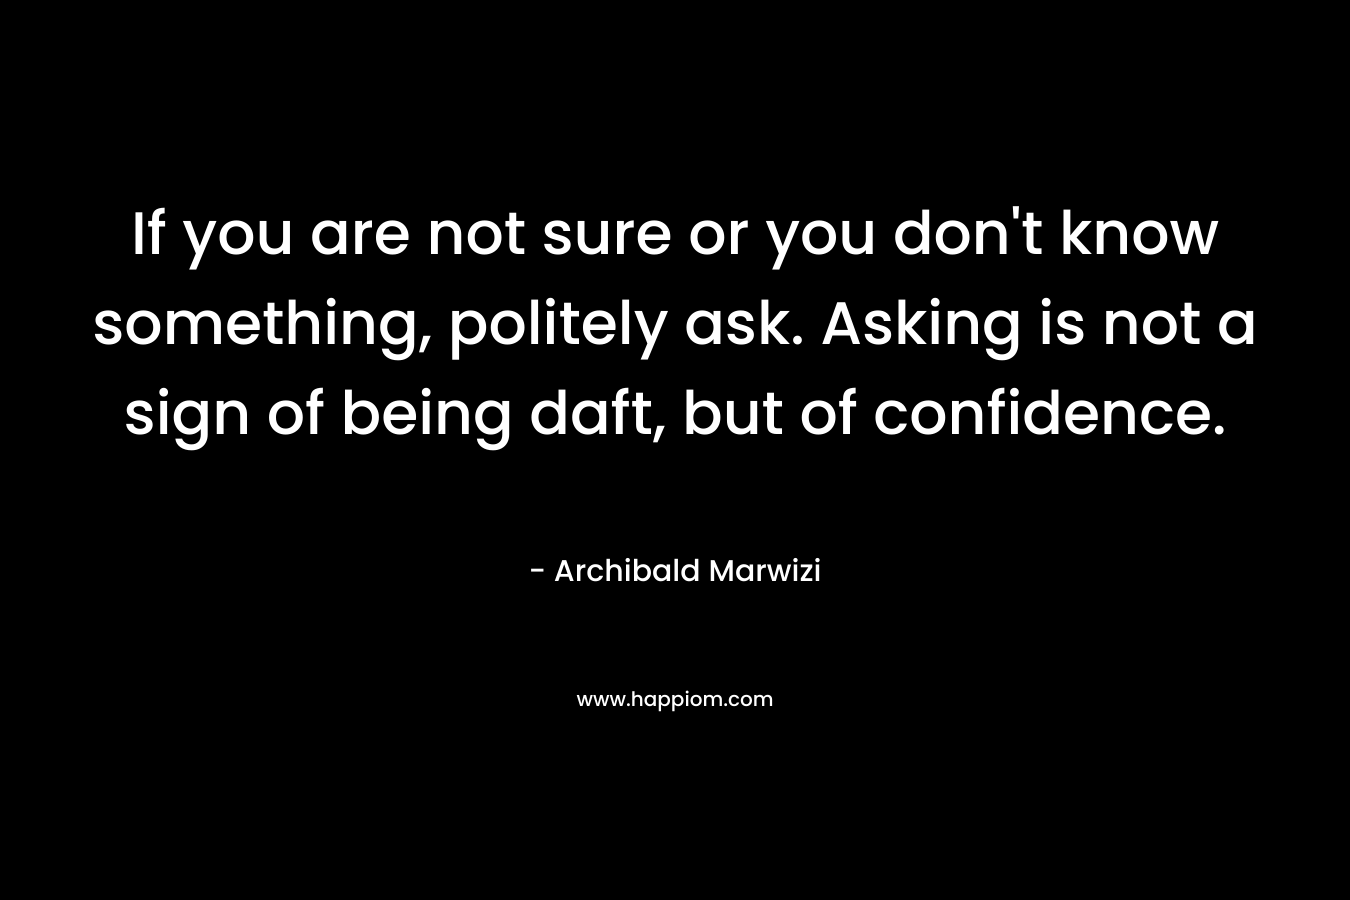 If you are not sure or you don’t know something, politely ask. Asking is not a sign of being daft, but of confidence. – Archibald Marwizi